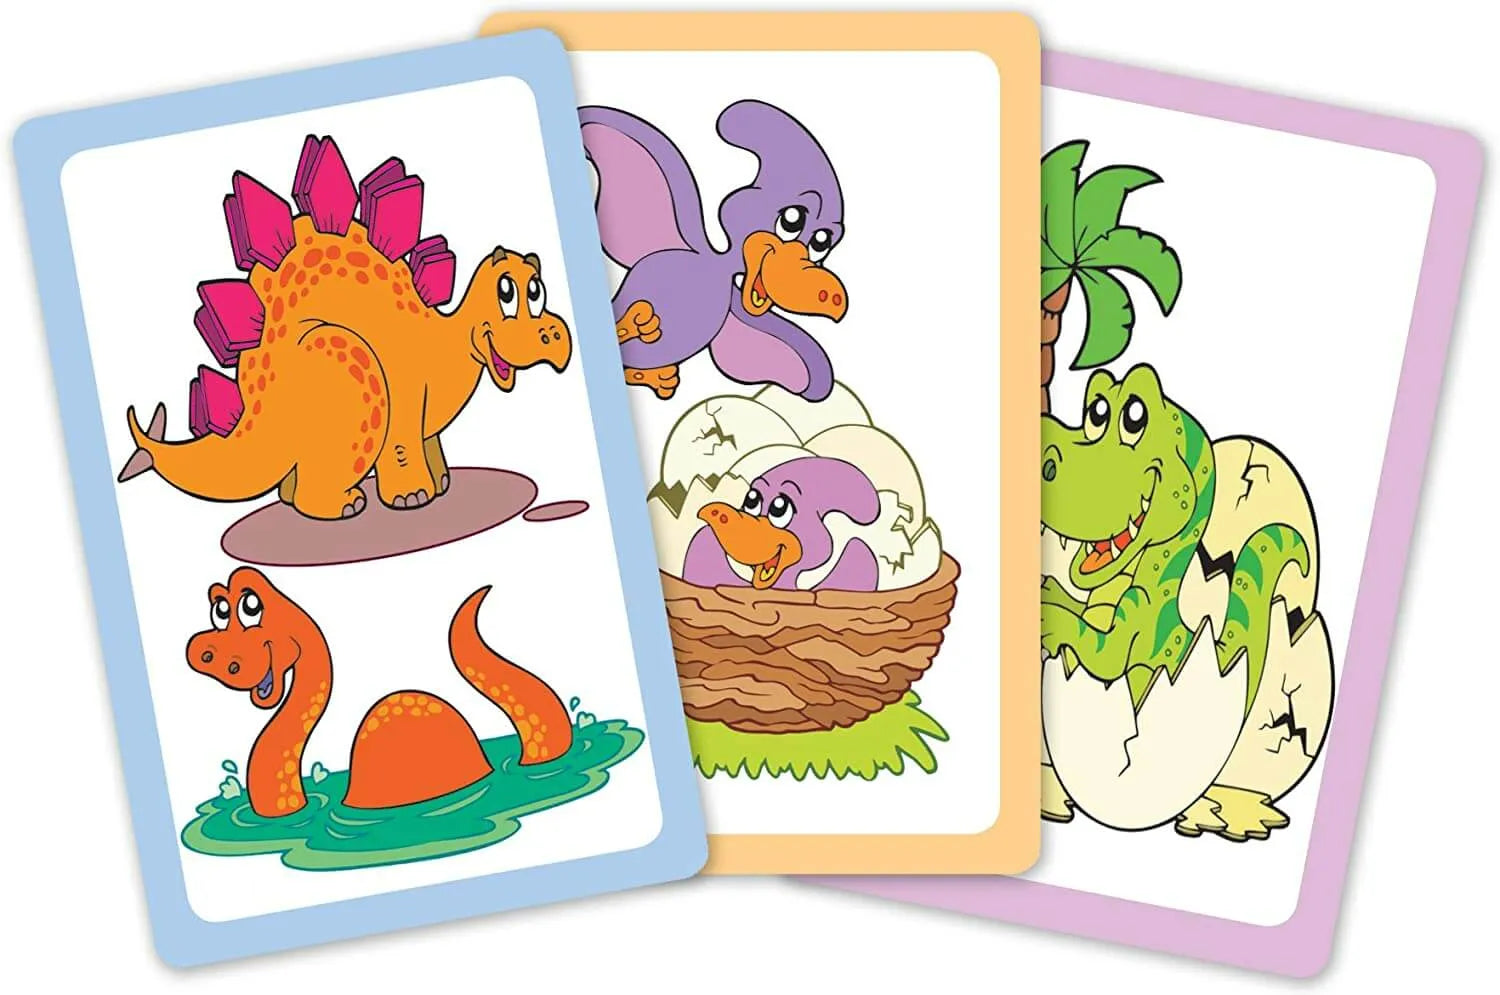 shop cheatwell games - card games for children